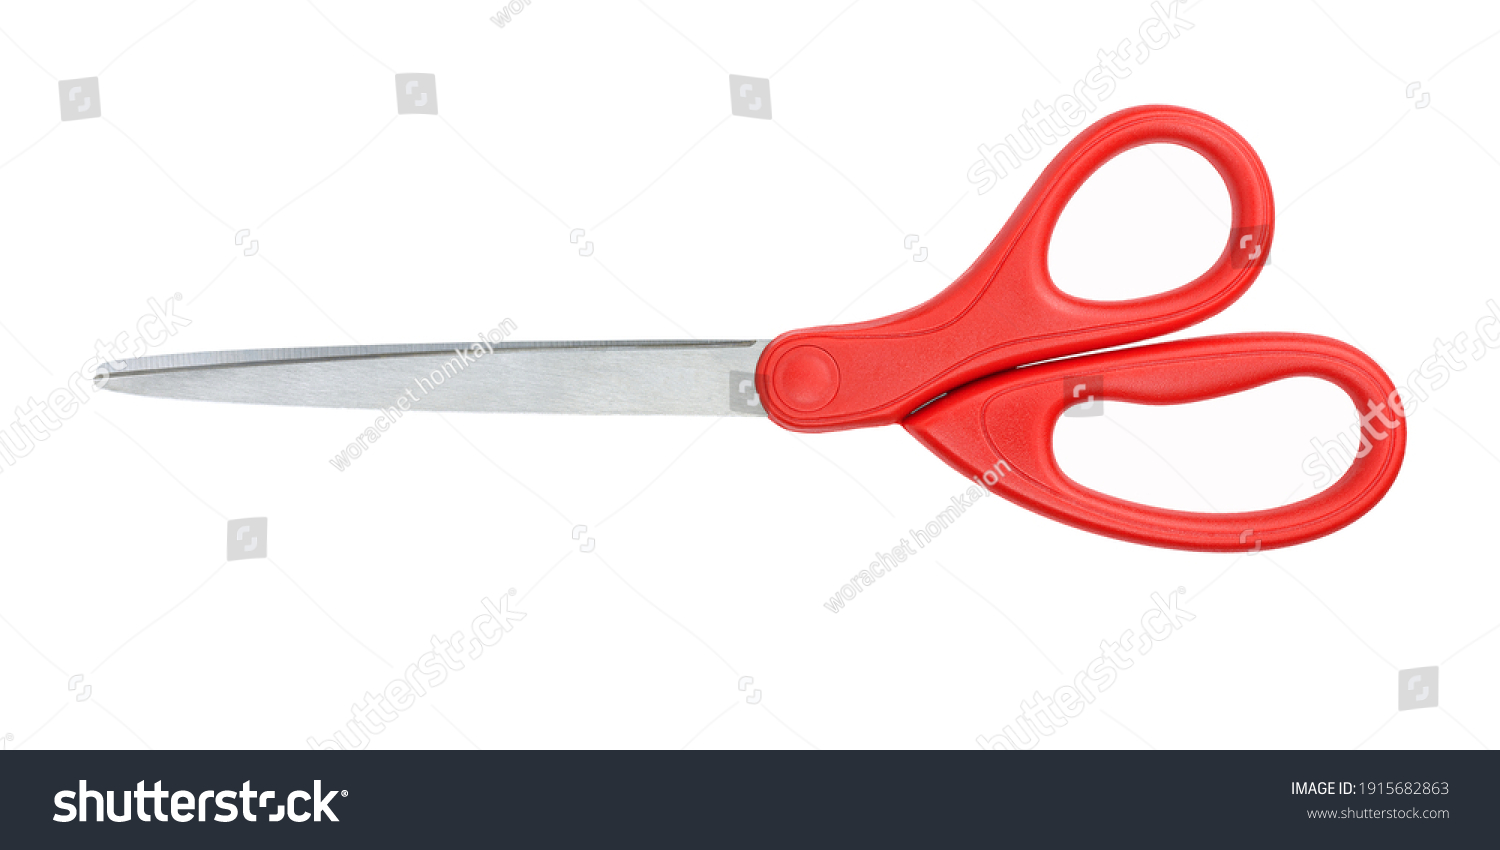 Red scissors isolated on white background #1915682863